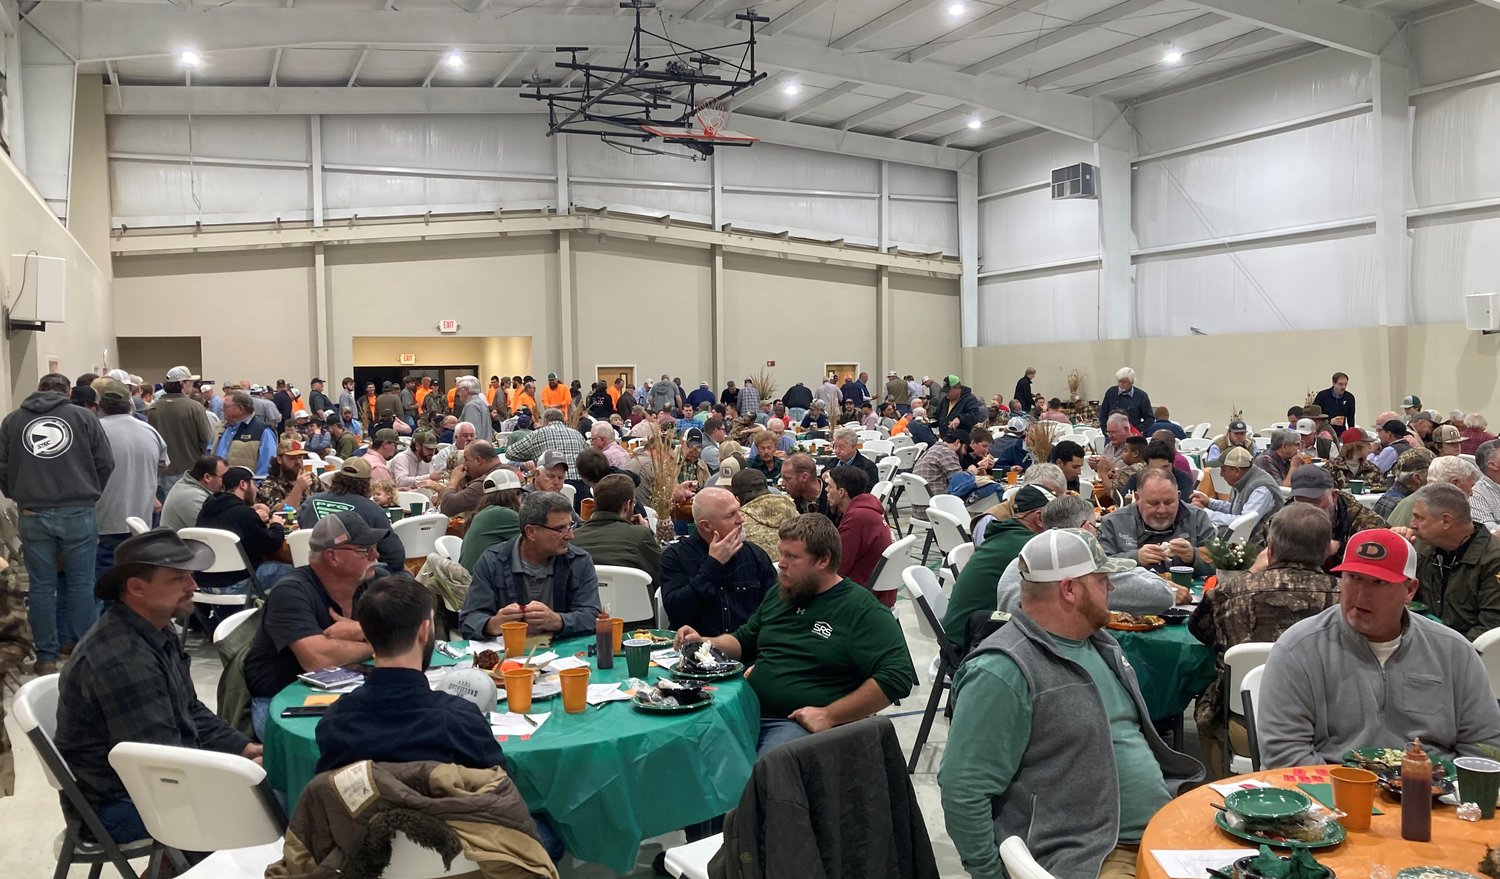 About 400 men gather for a wild game dinner at Bethel Baptist Church in Omega, Ga., on Feb. 3, 2023. (Index/Roger Alford)